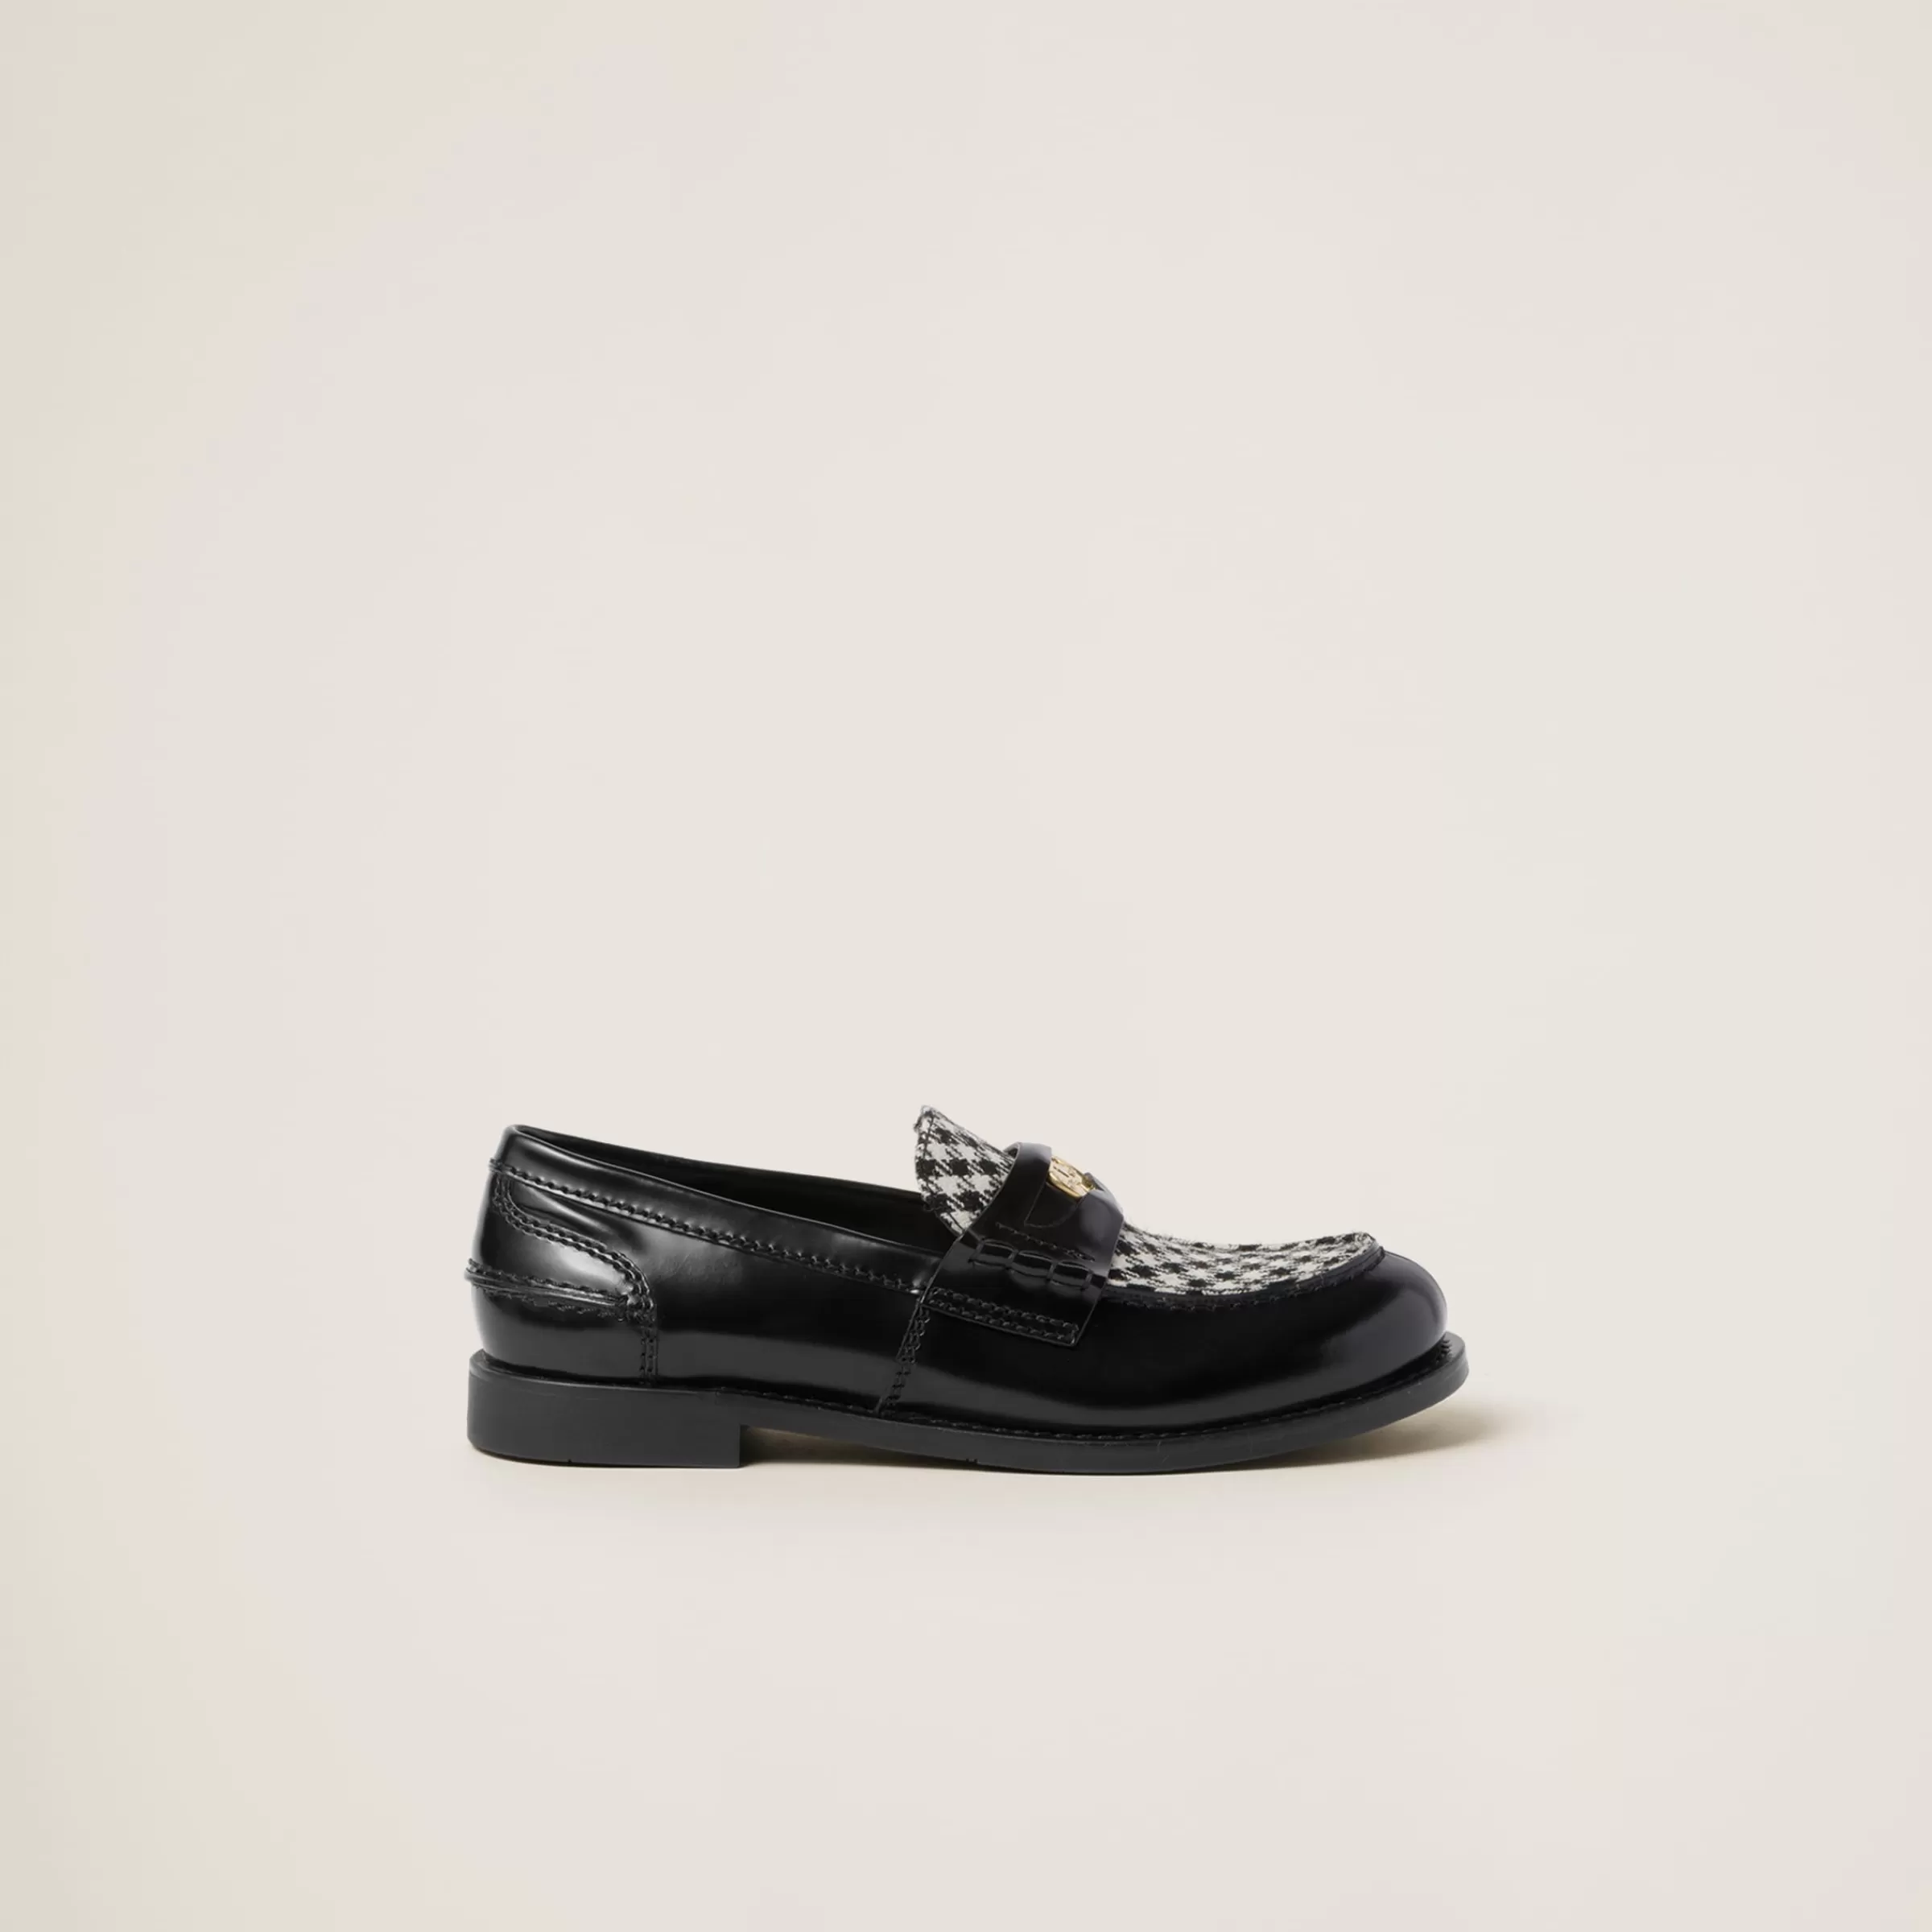 Miu Miu Brushed Leather And Gingham Check Fabric Loafers |